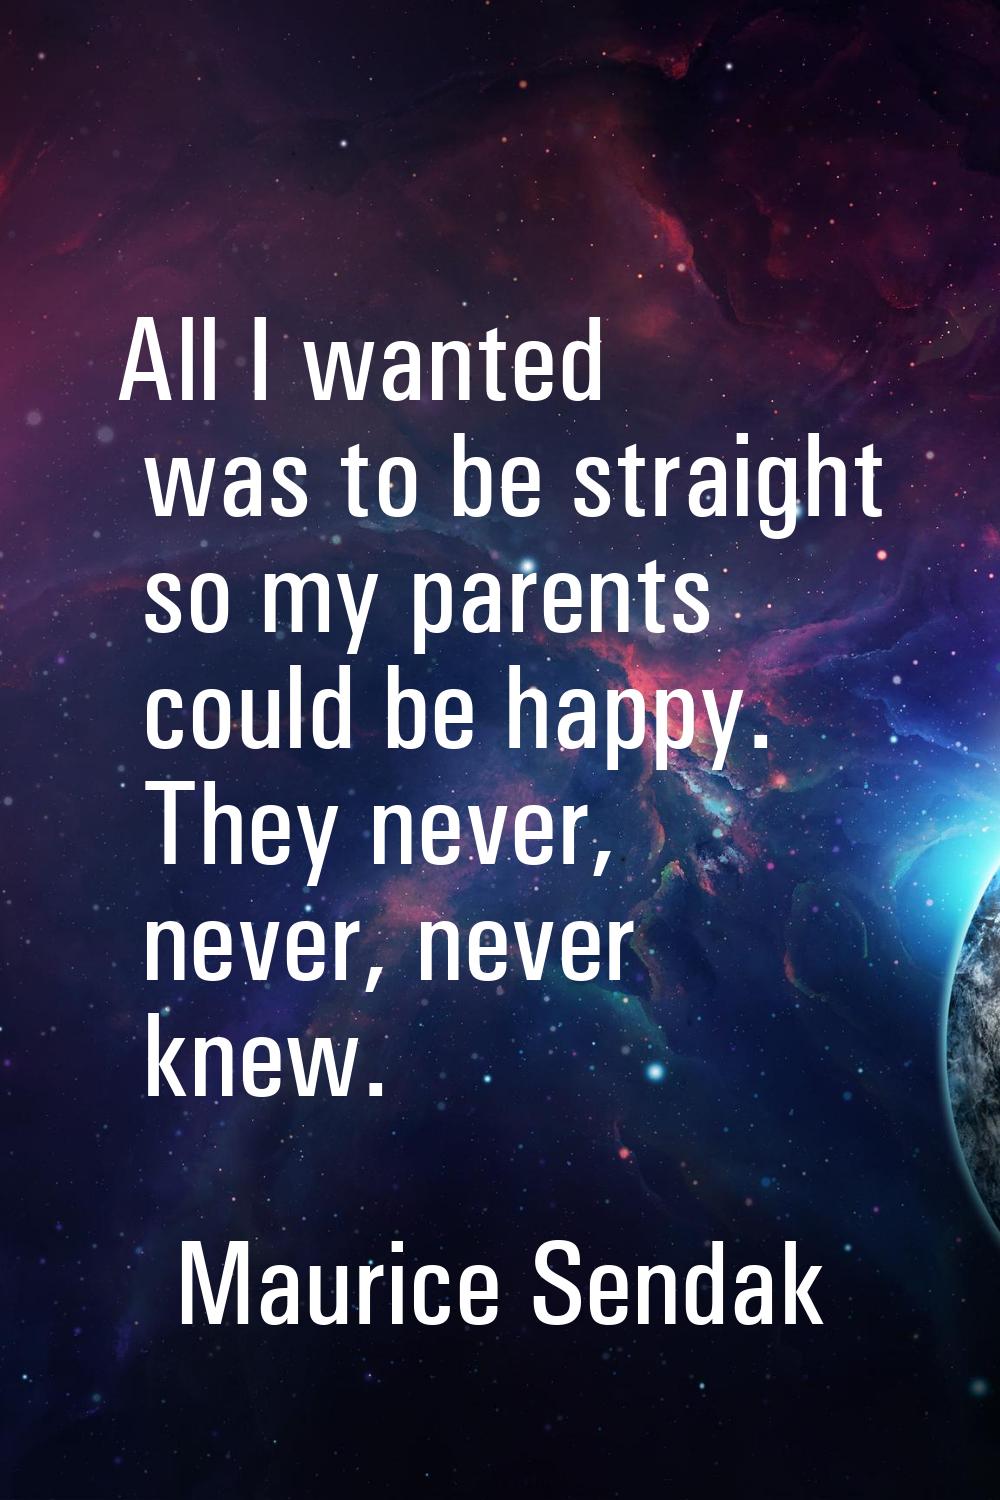 All I wanted was to be straight so my parents could be happy. They never, never, never knew.